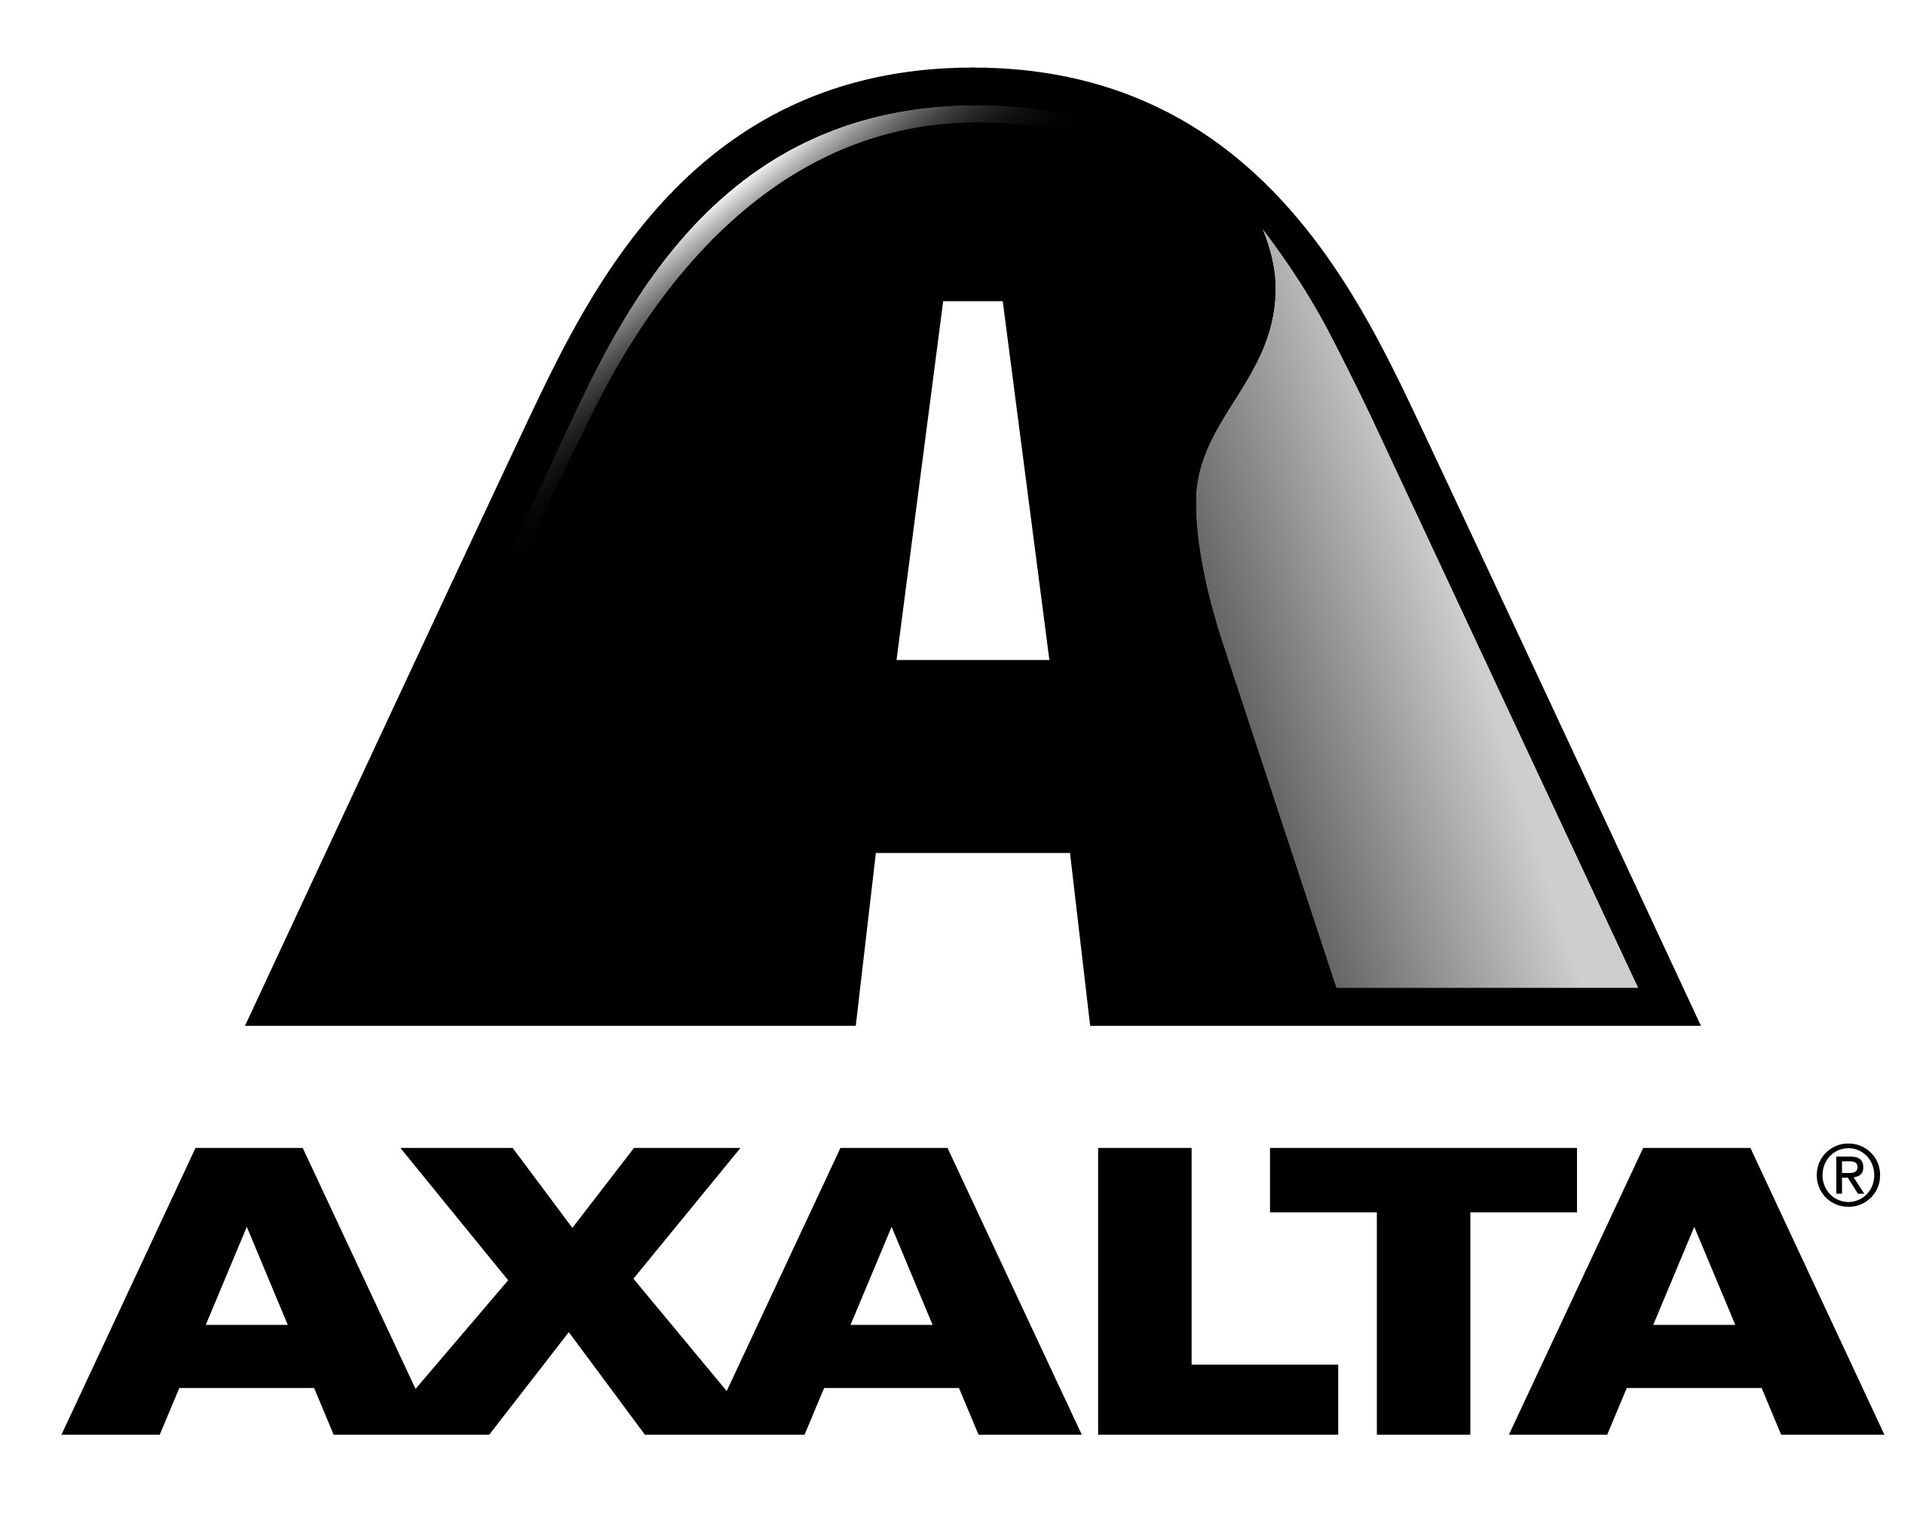 A black and white logo for axalta on a white background